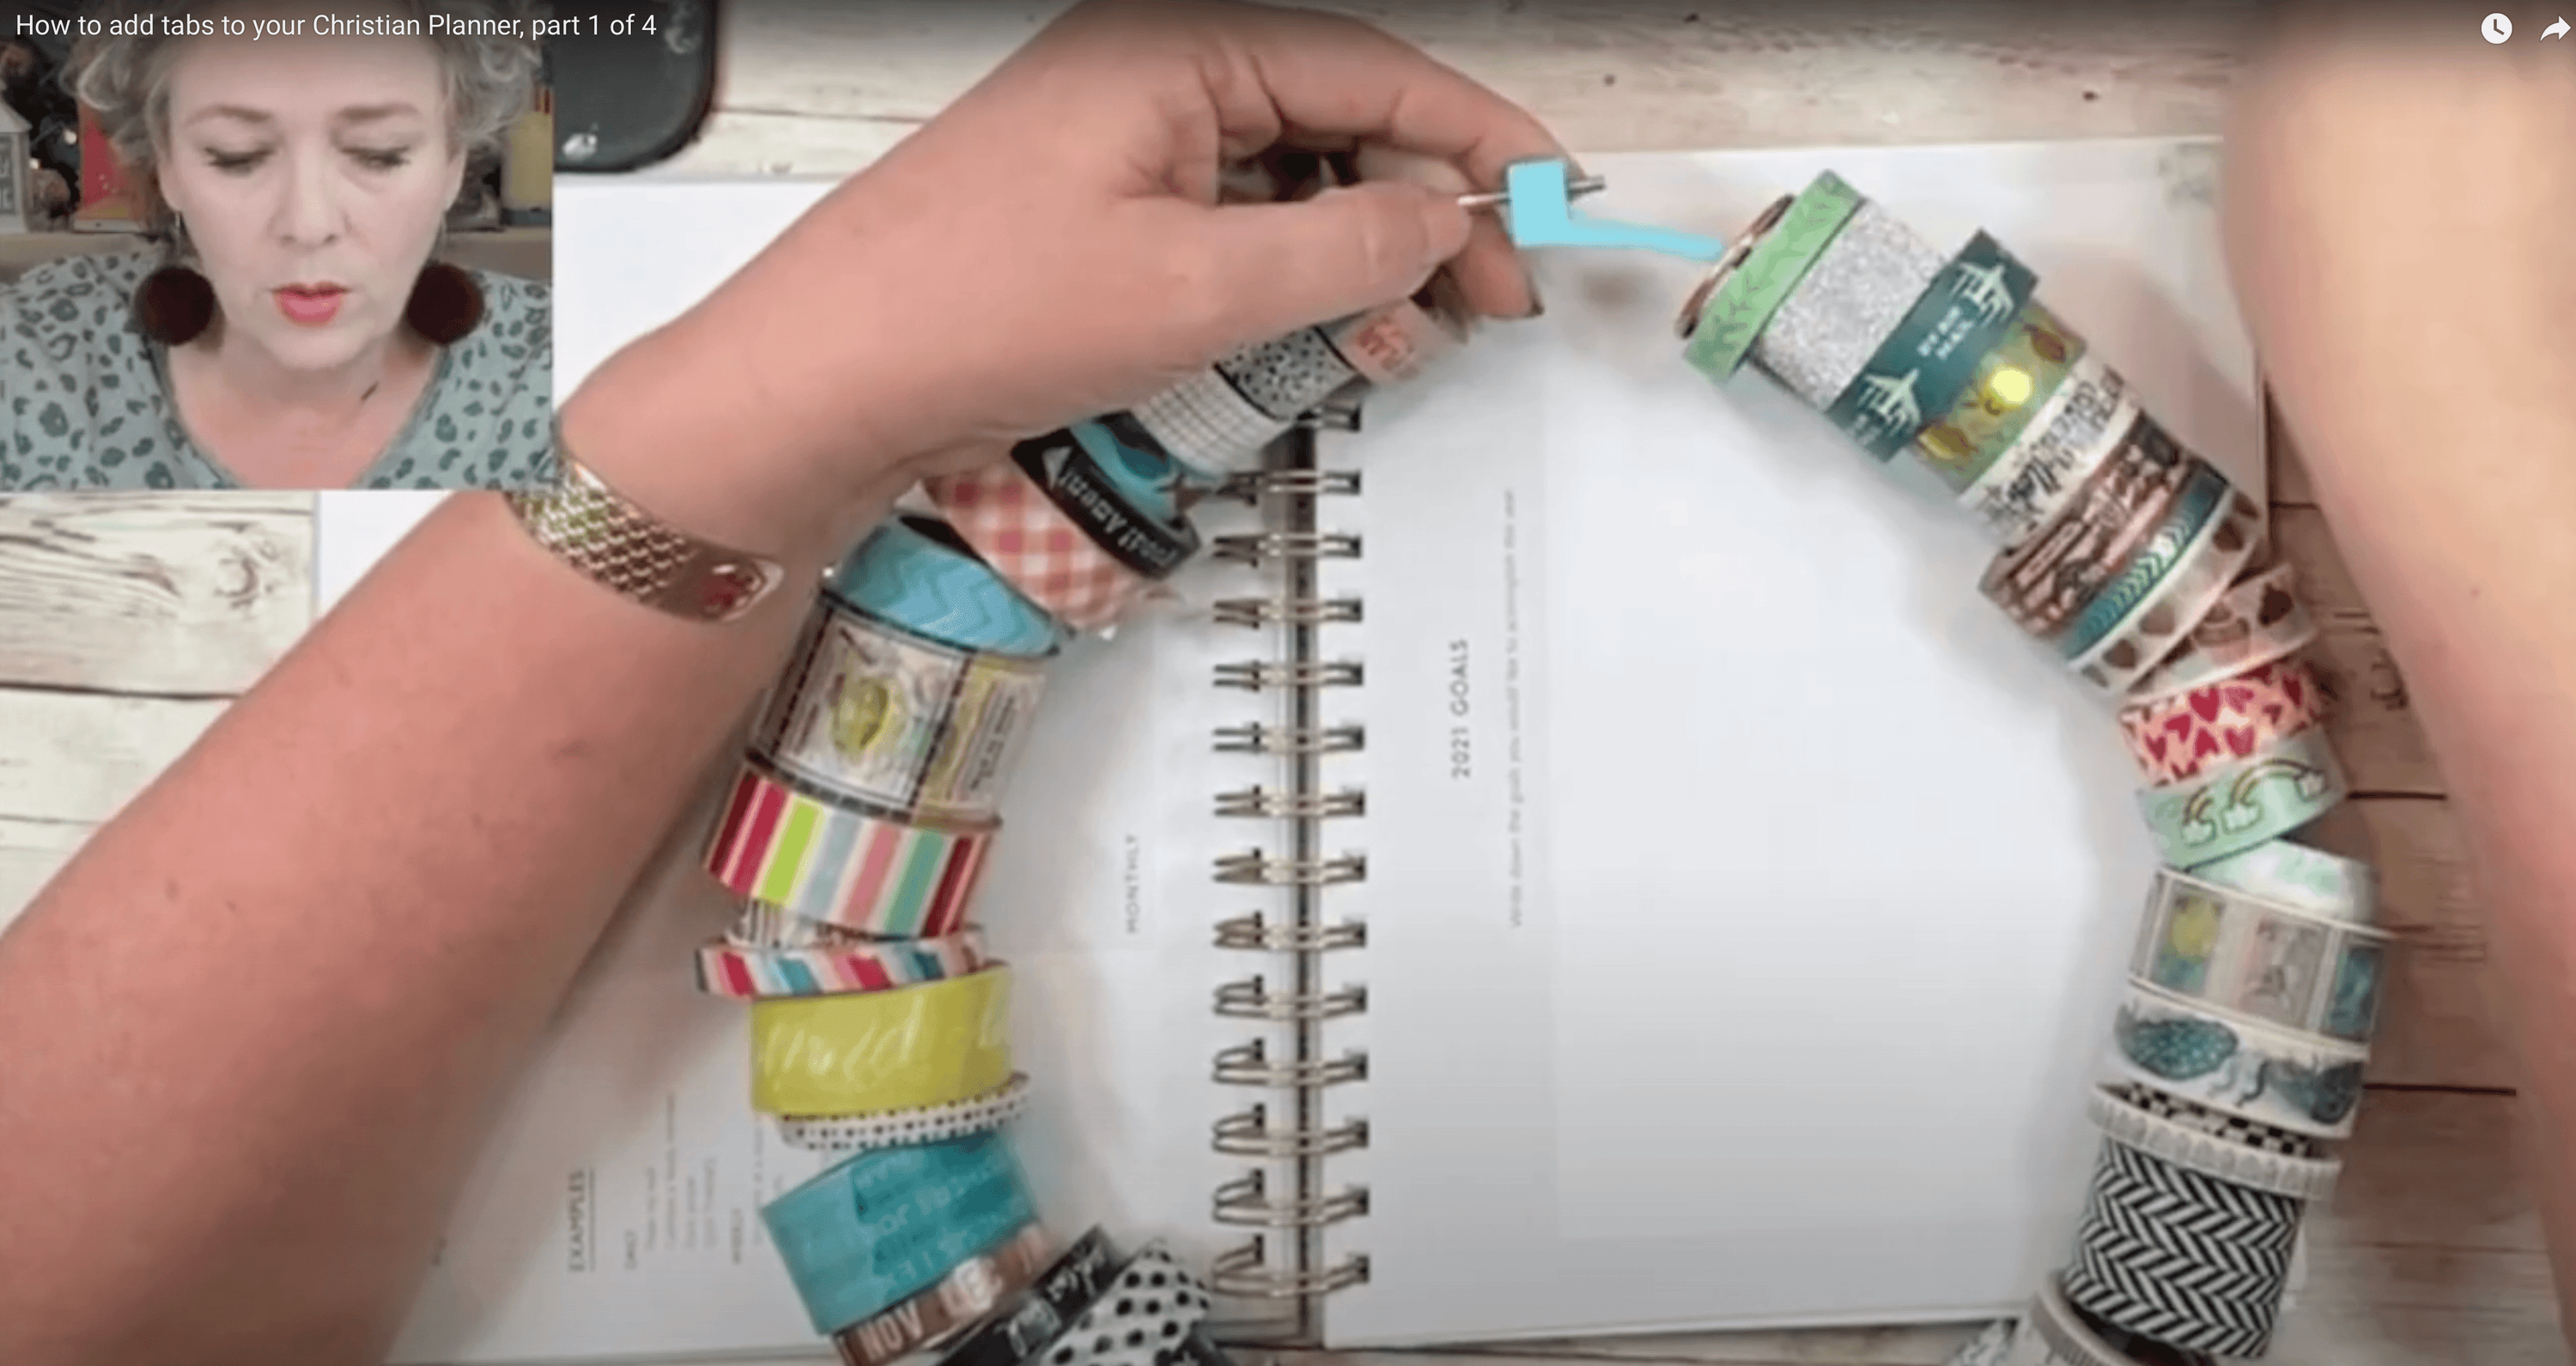 How to Create Tabs Using Washi Tape for Your Christian Planner - Part 1